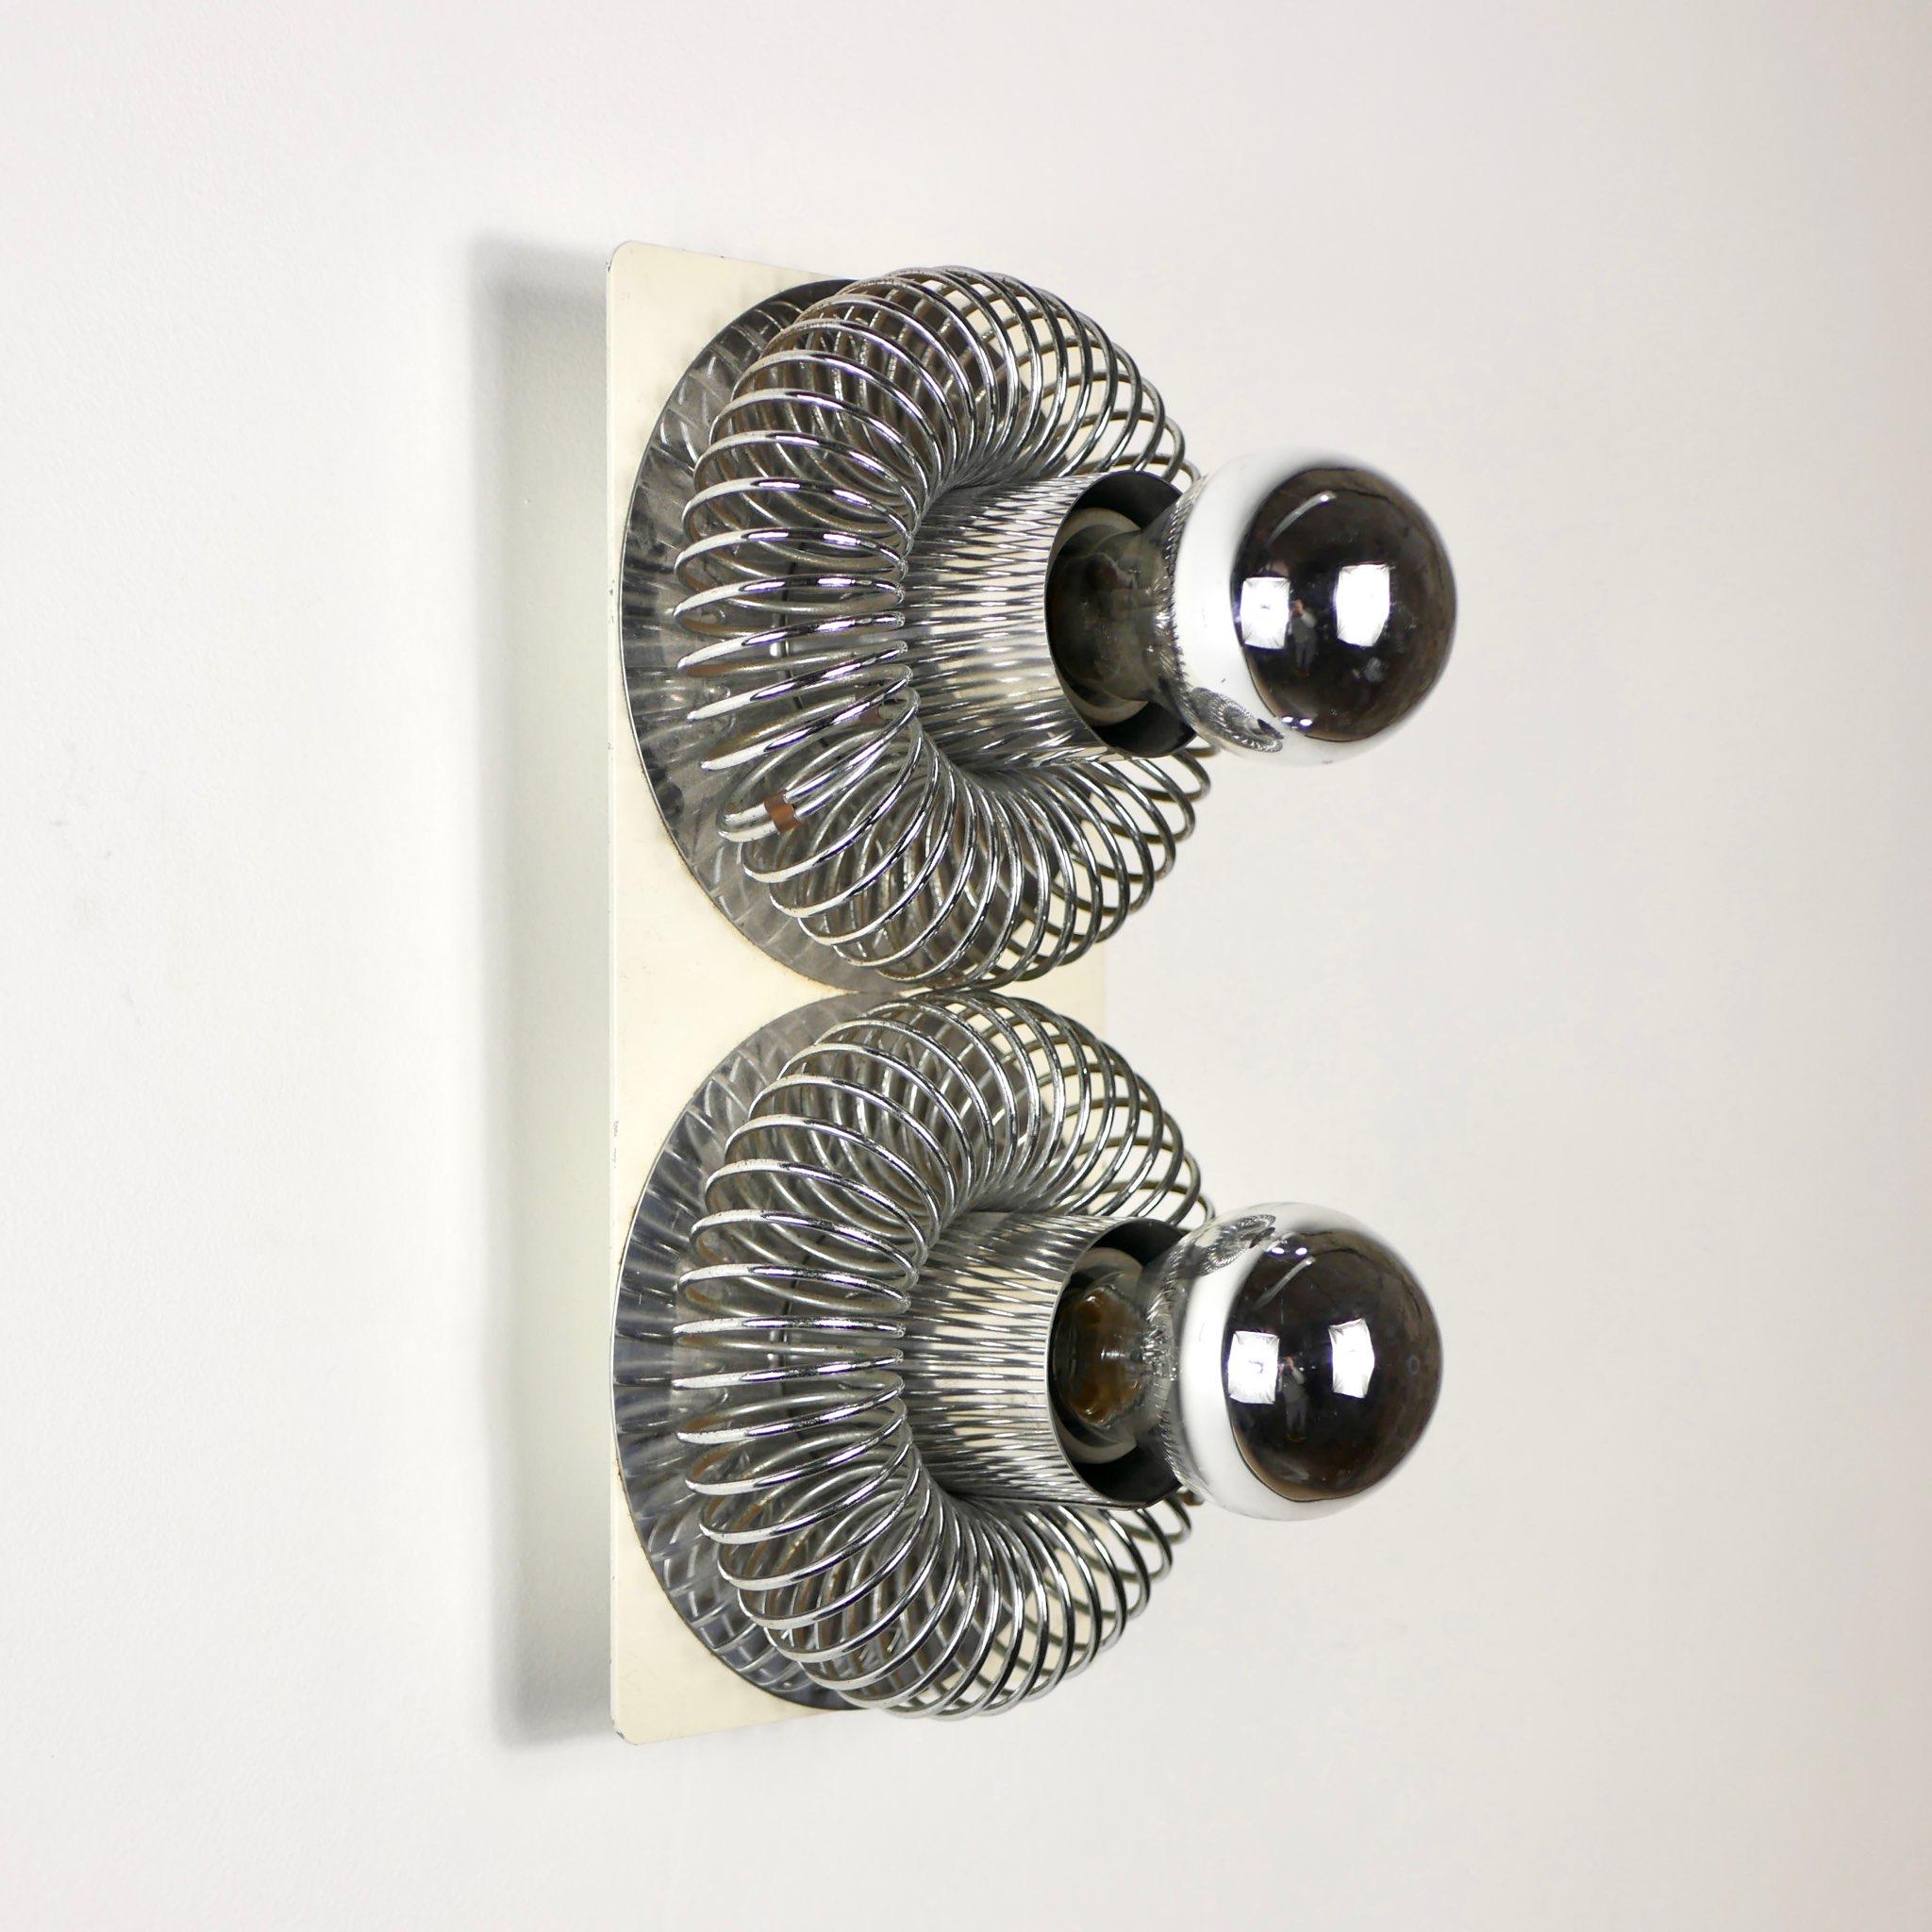 Nice double spring wall light designed by Andrea Lazzari for Morosini in the end of the 1960s, made in Italy.
Metal springs, white lacquered metal base.
Overall good condition, light traces of time.
Dimensions : H29, L15, P10cm